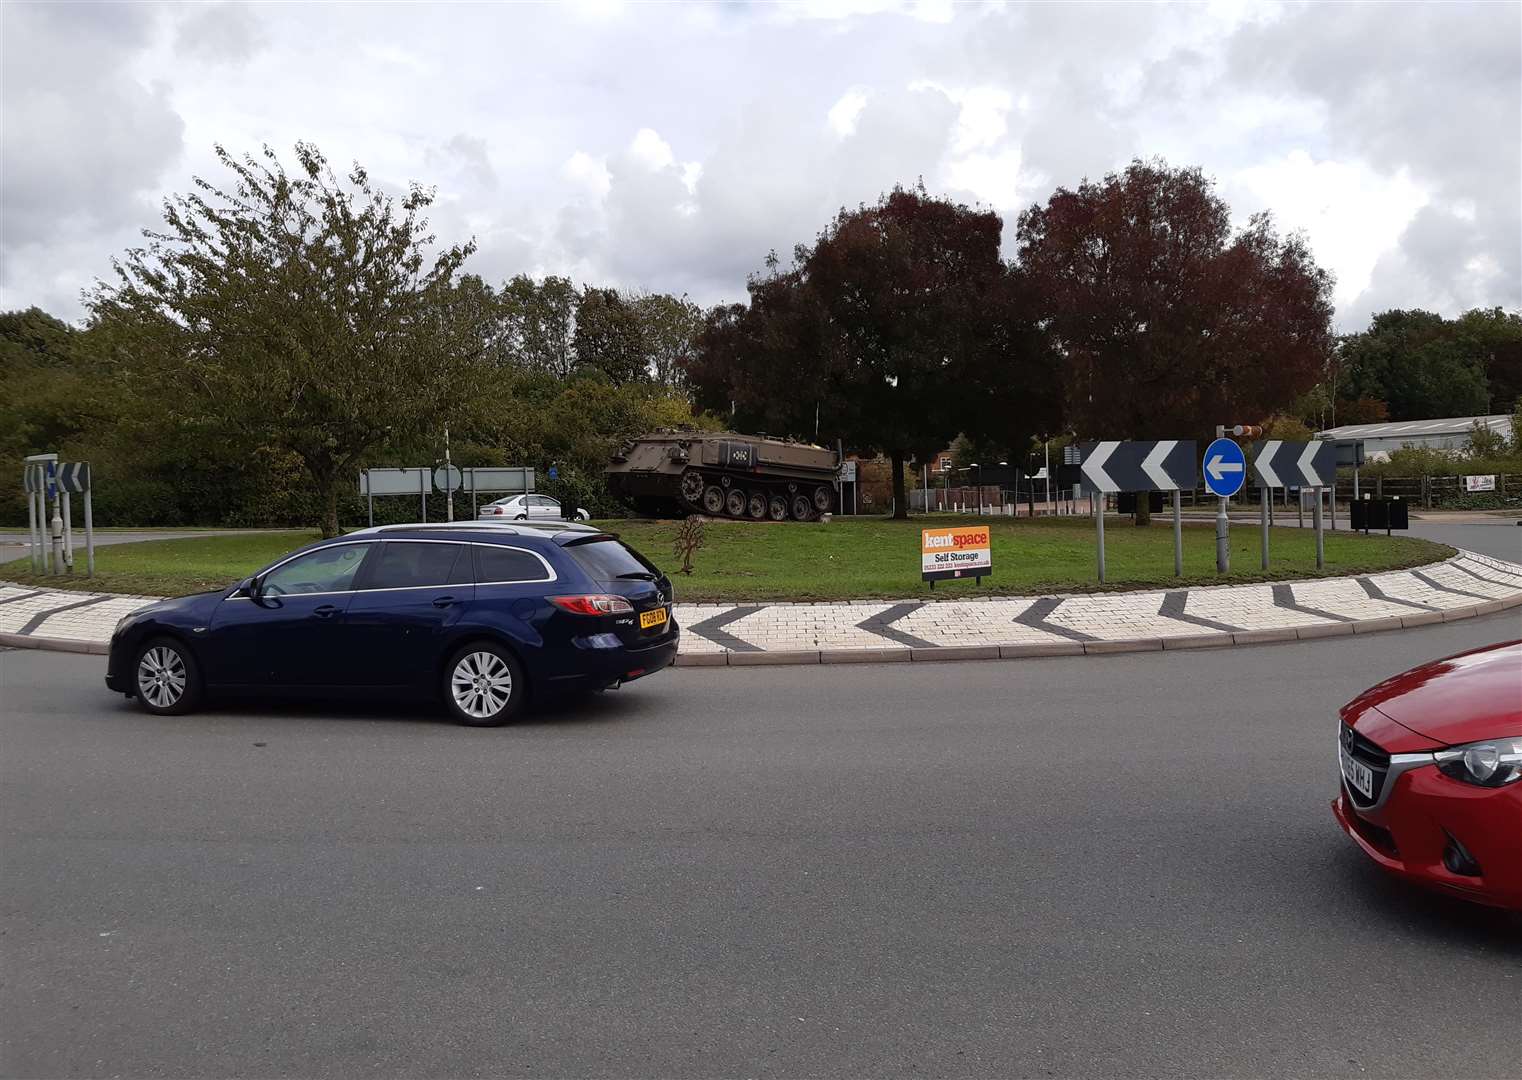 The McDonald's will go next to the landmark 'tank roundabout' if approved